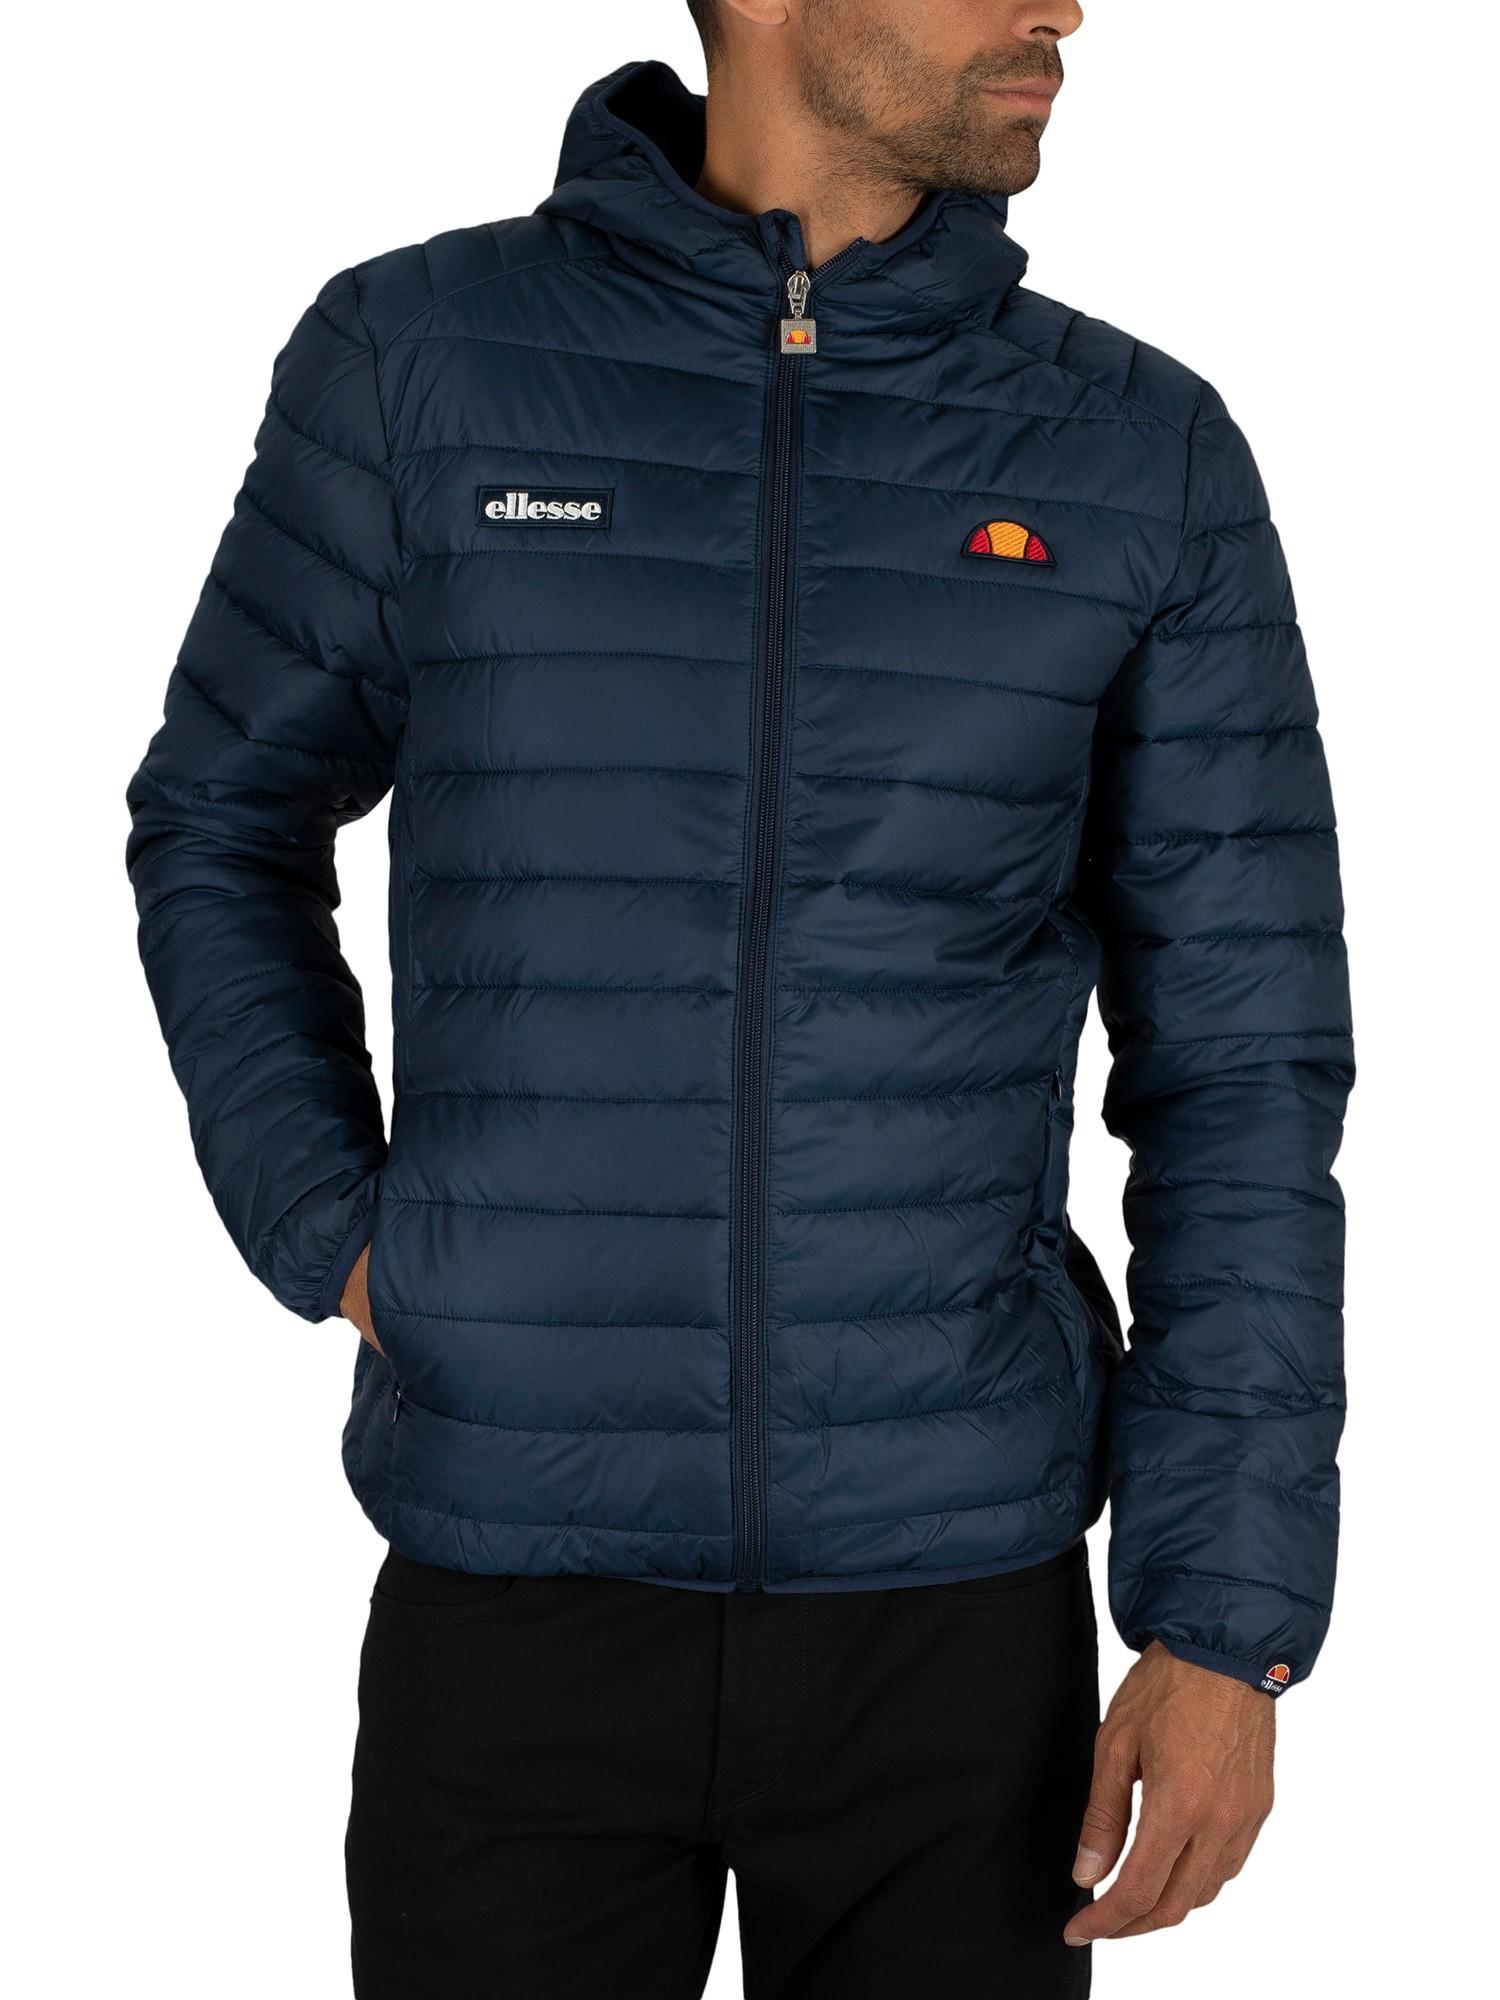 Ellesse Lombardy Padded Veste pour Homme